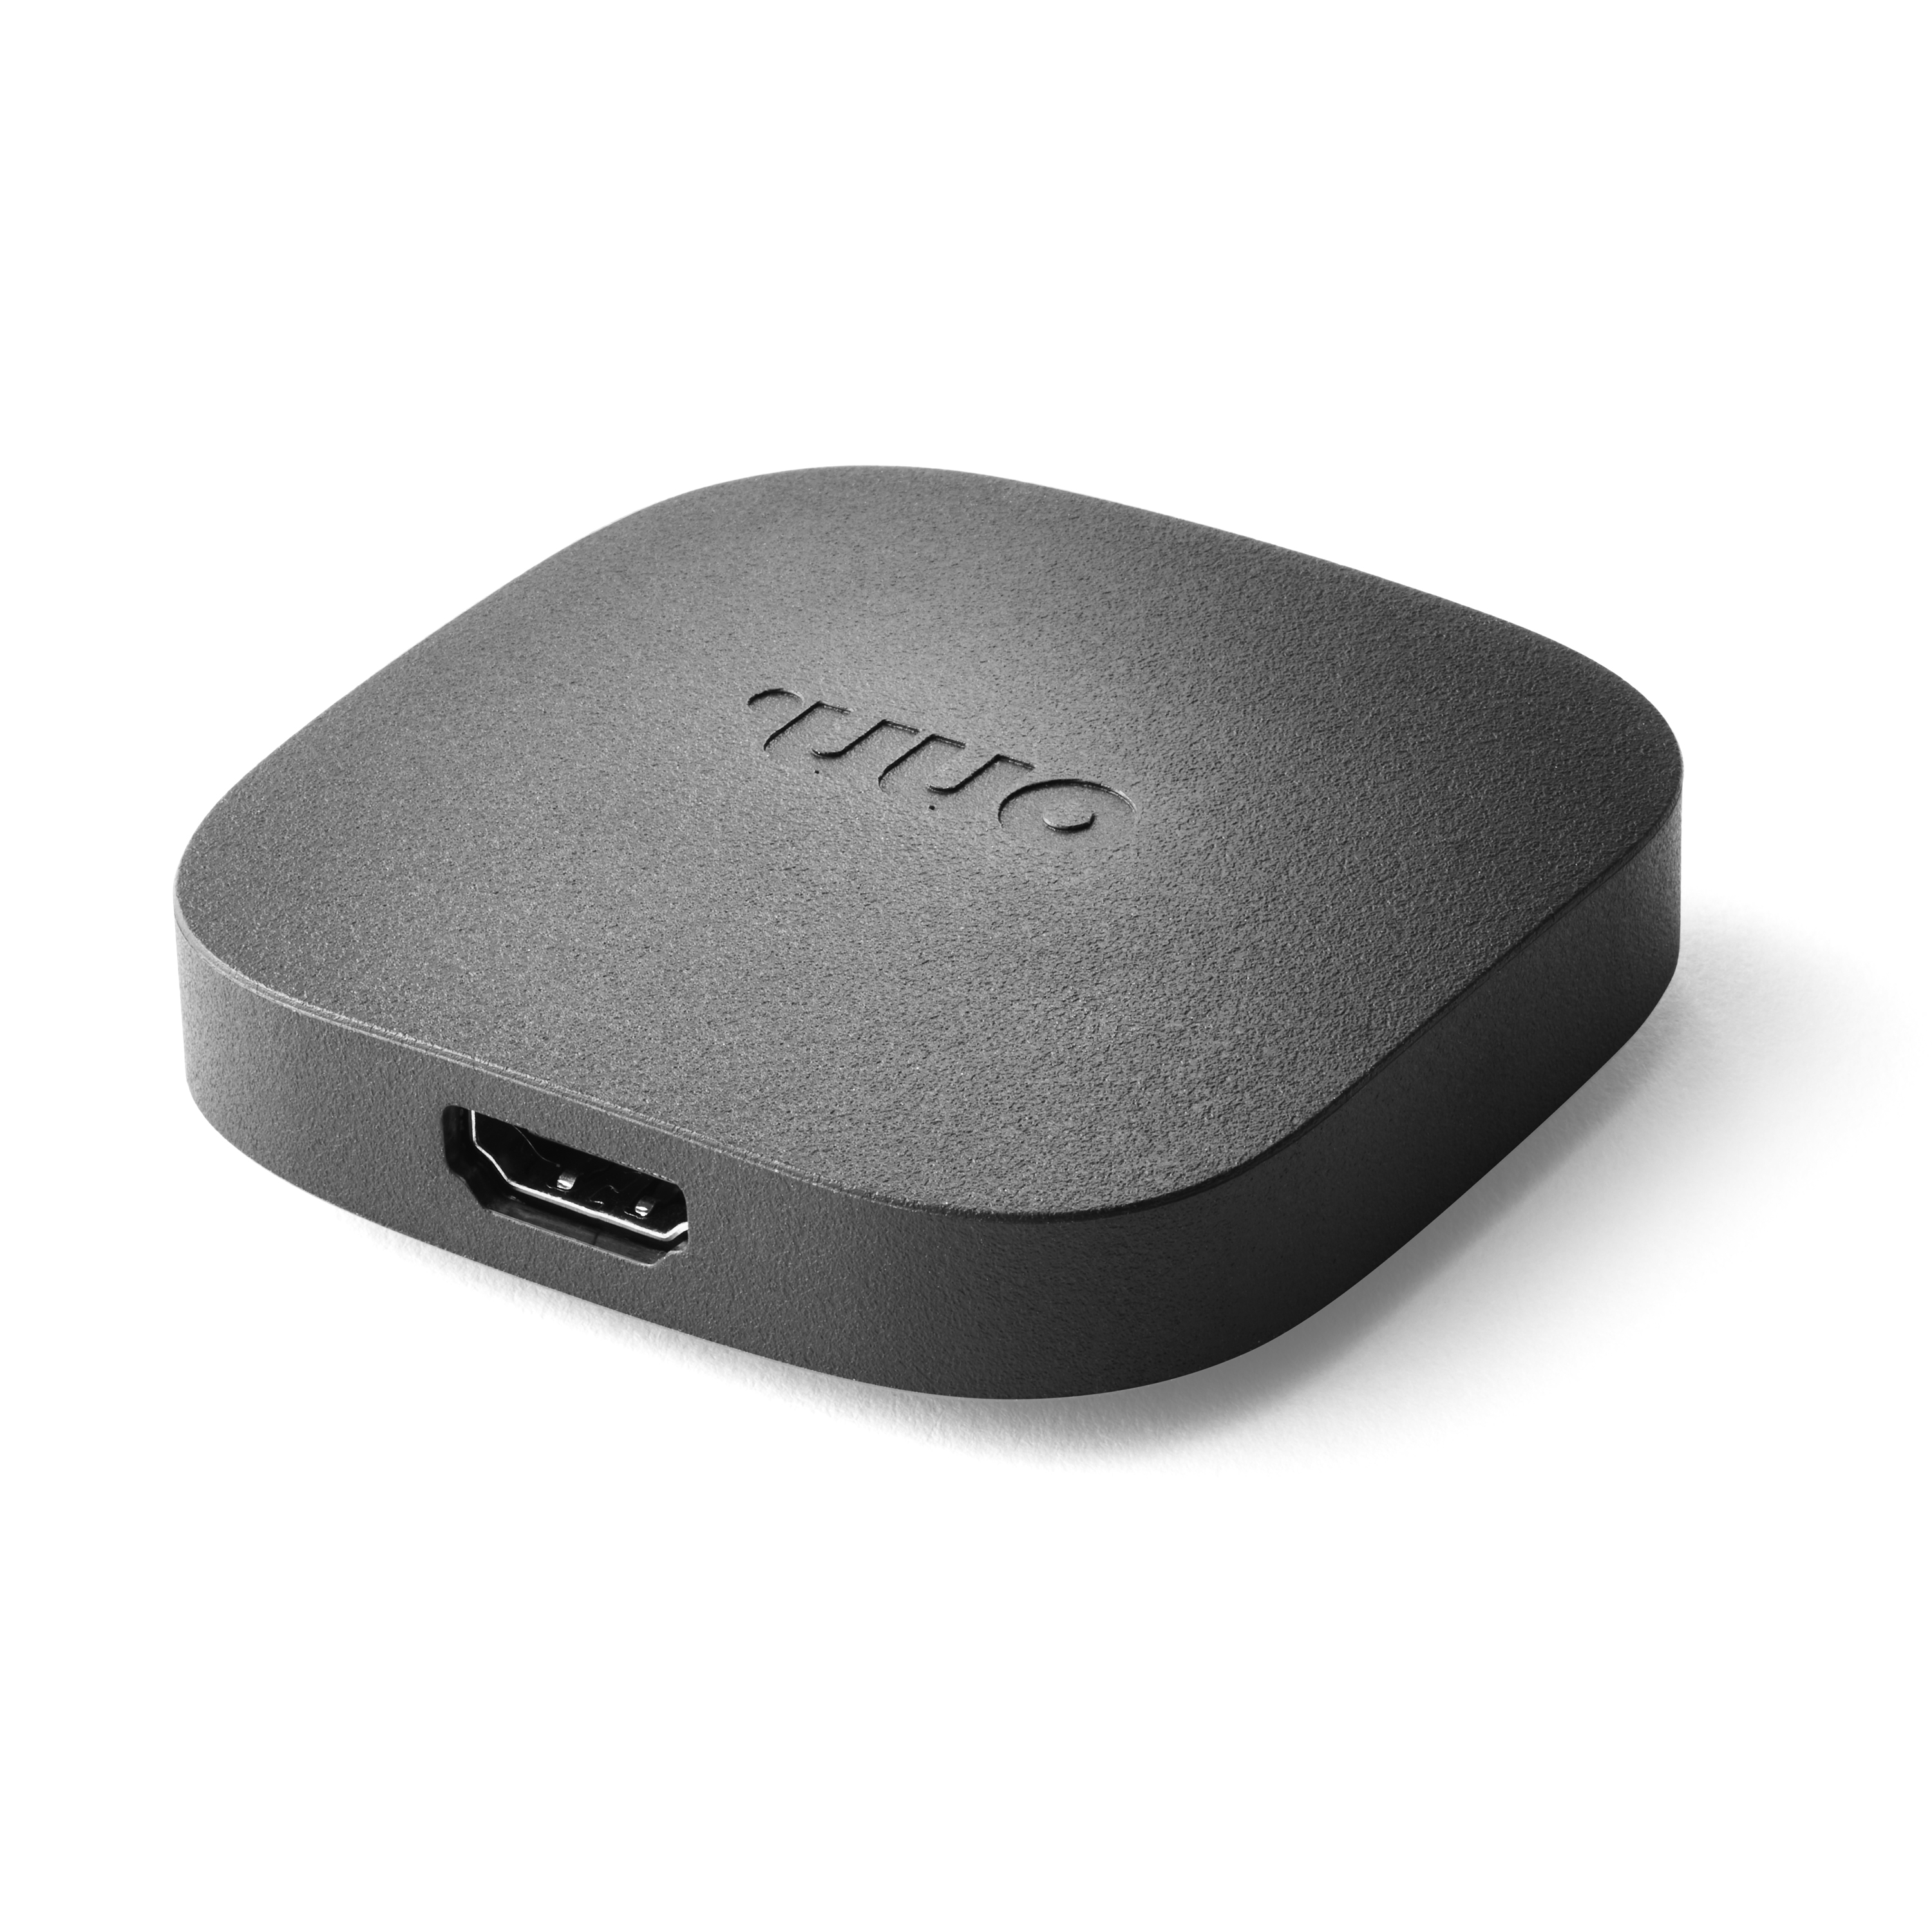 onn. Android TV 4K UHD Streaming Device with Voice Remote Control & HDMI Cable - image 1 of 11